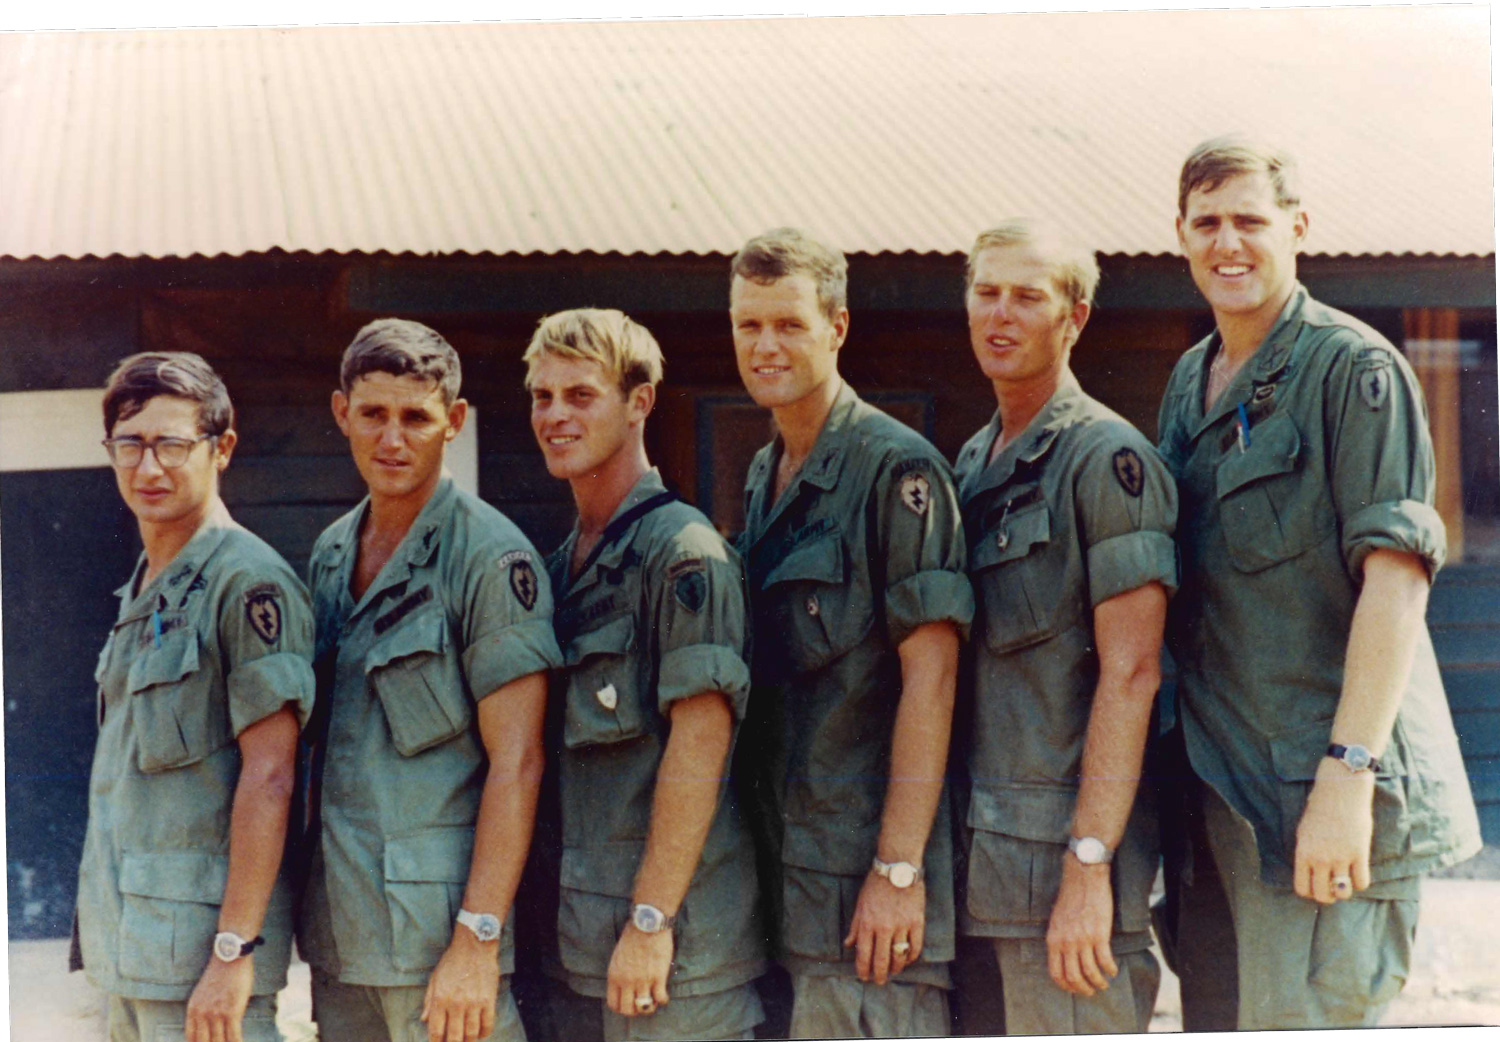 Rick Whitaker (second from right) with West Point classmates in Vietnam, 25th Infantry Division, March 1971